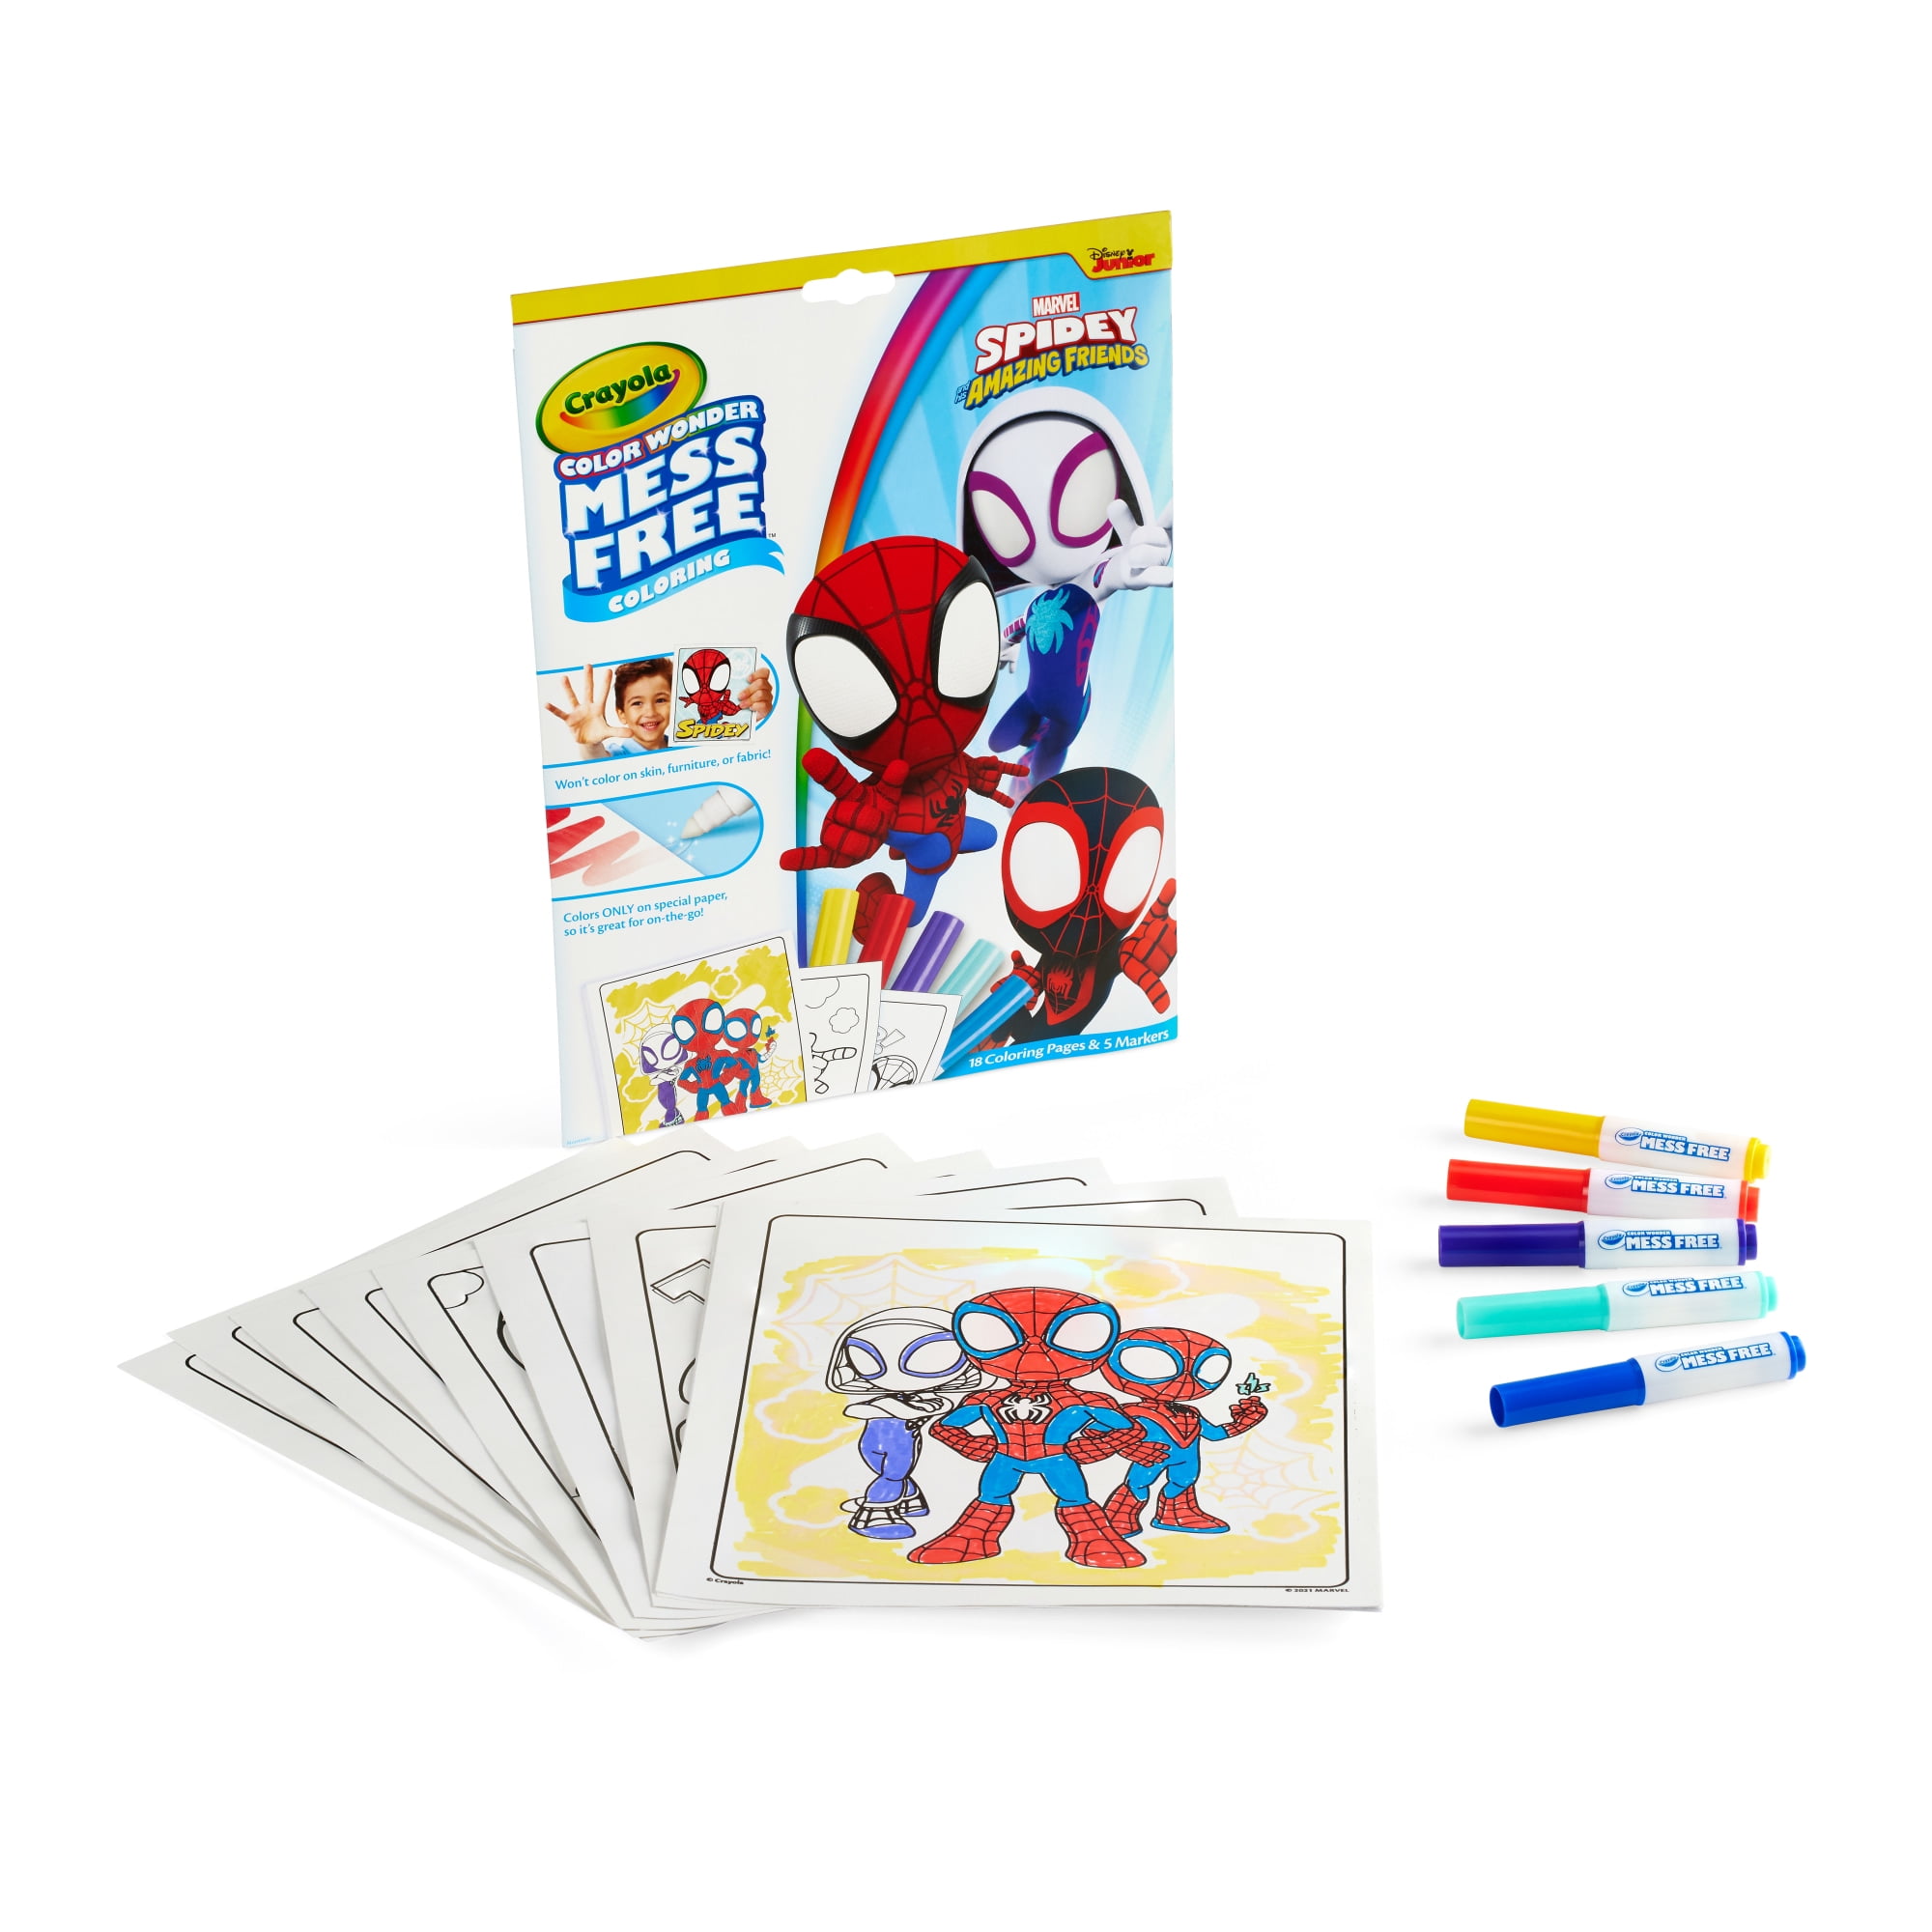 Crayola Color Wonder, Spiderman Coloring Pages & Mess Free Markers